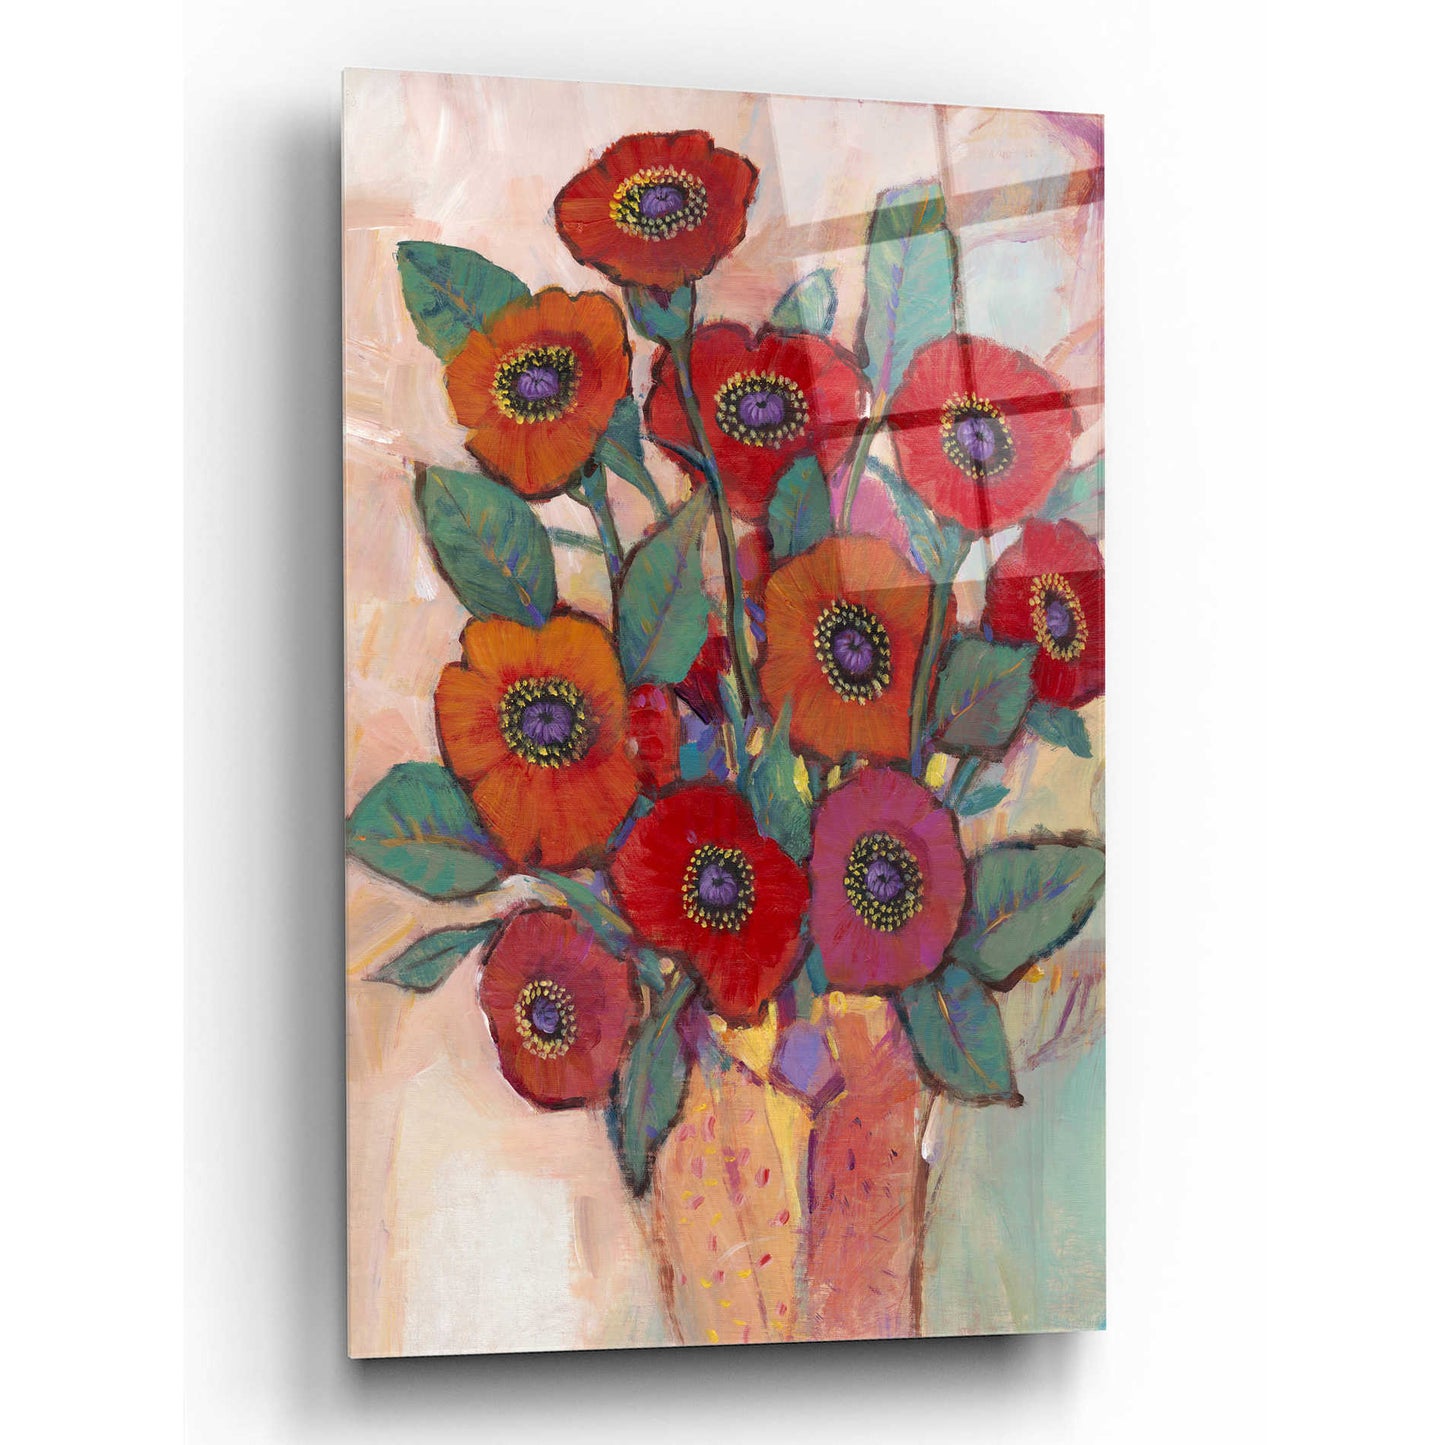 Epic Art 'Poppies in a Vase II' by Tim O'Toole, Acrylic Glass Wall Art,12x16